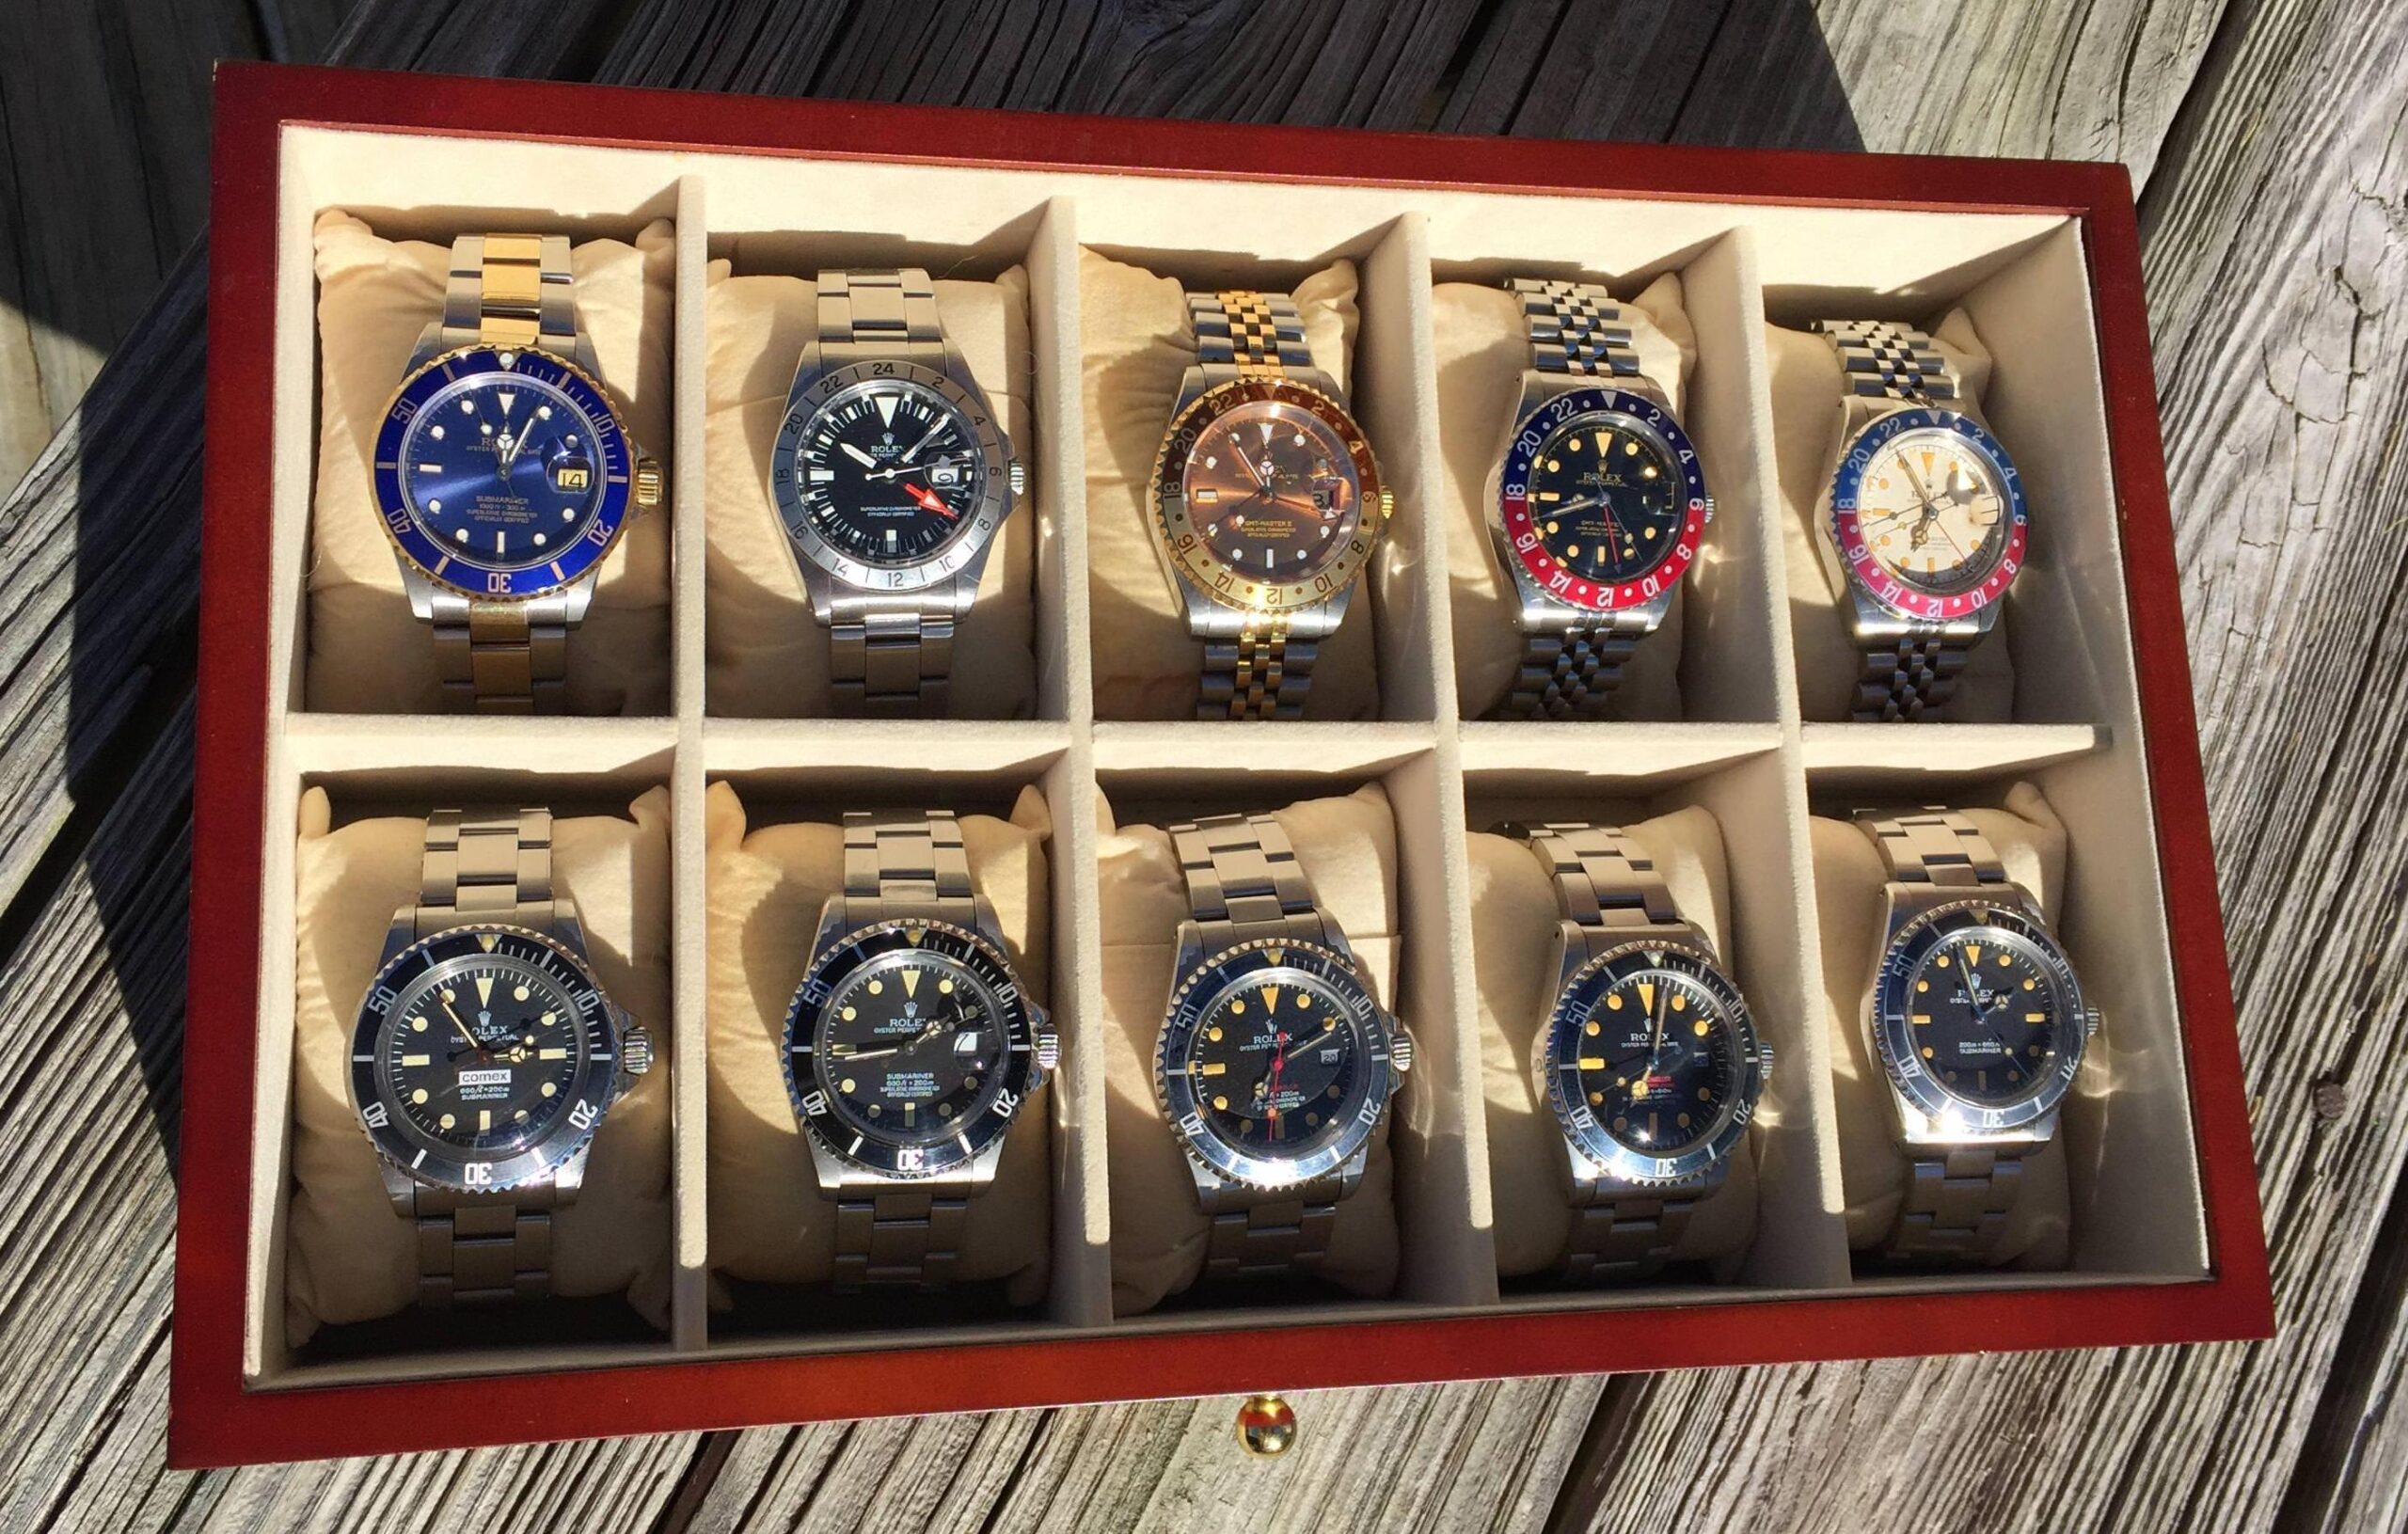 An In-Depth Examination of Tudor’s Classic Black Bay Collection